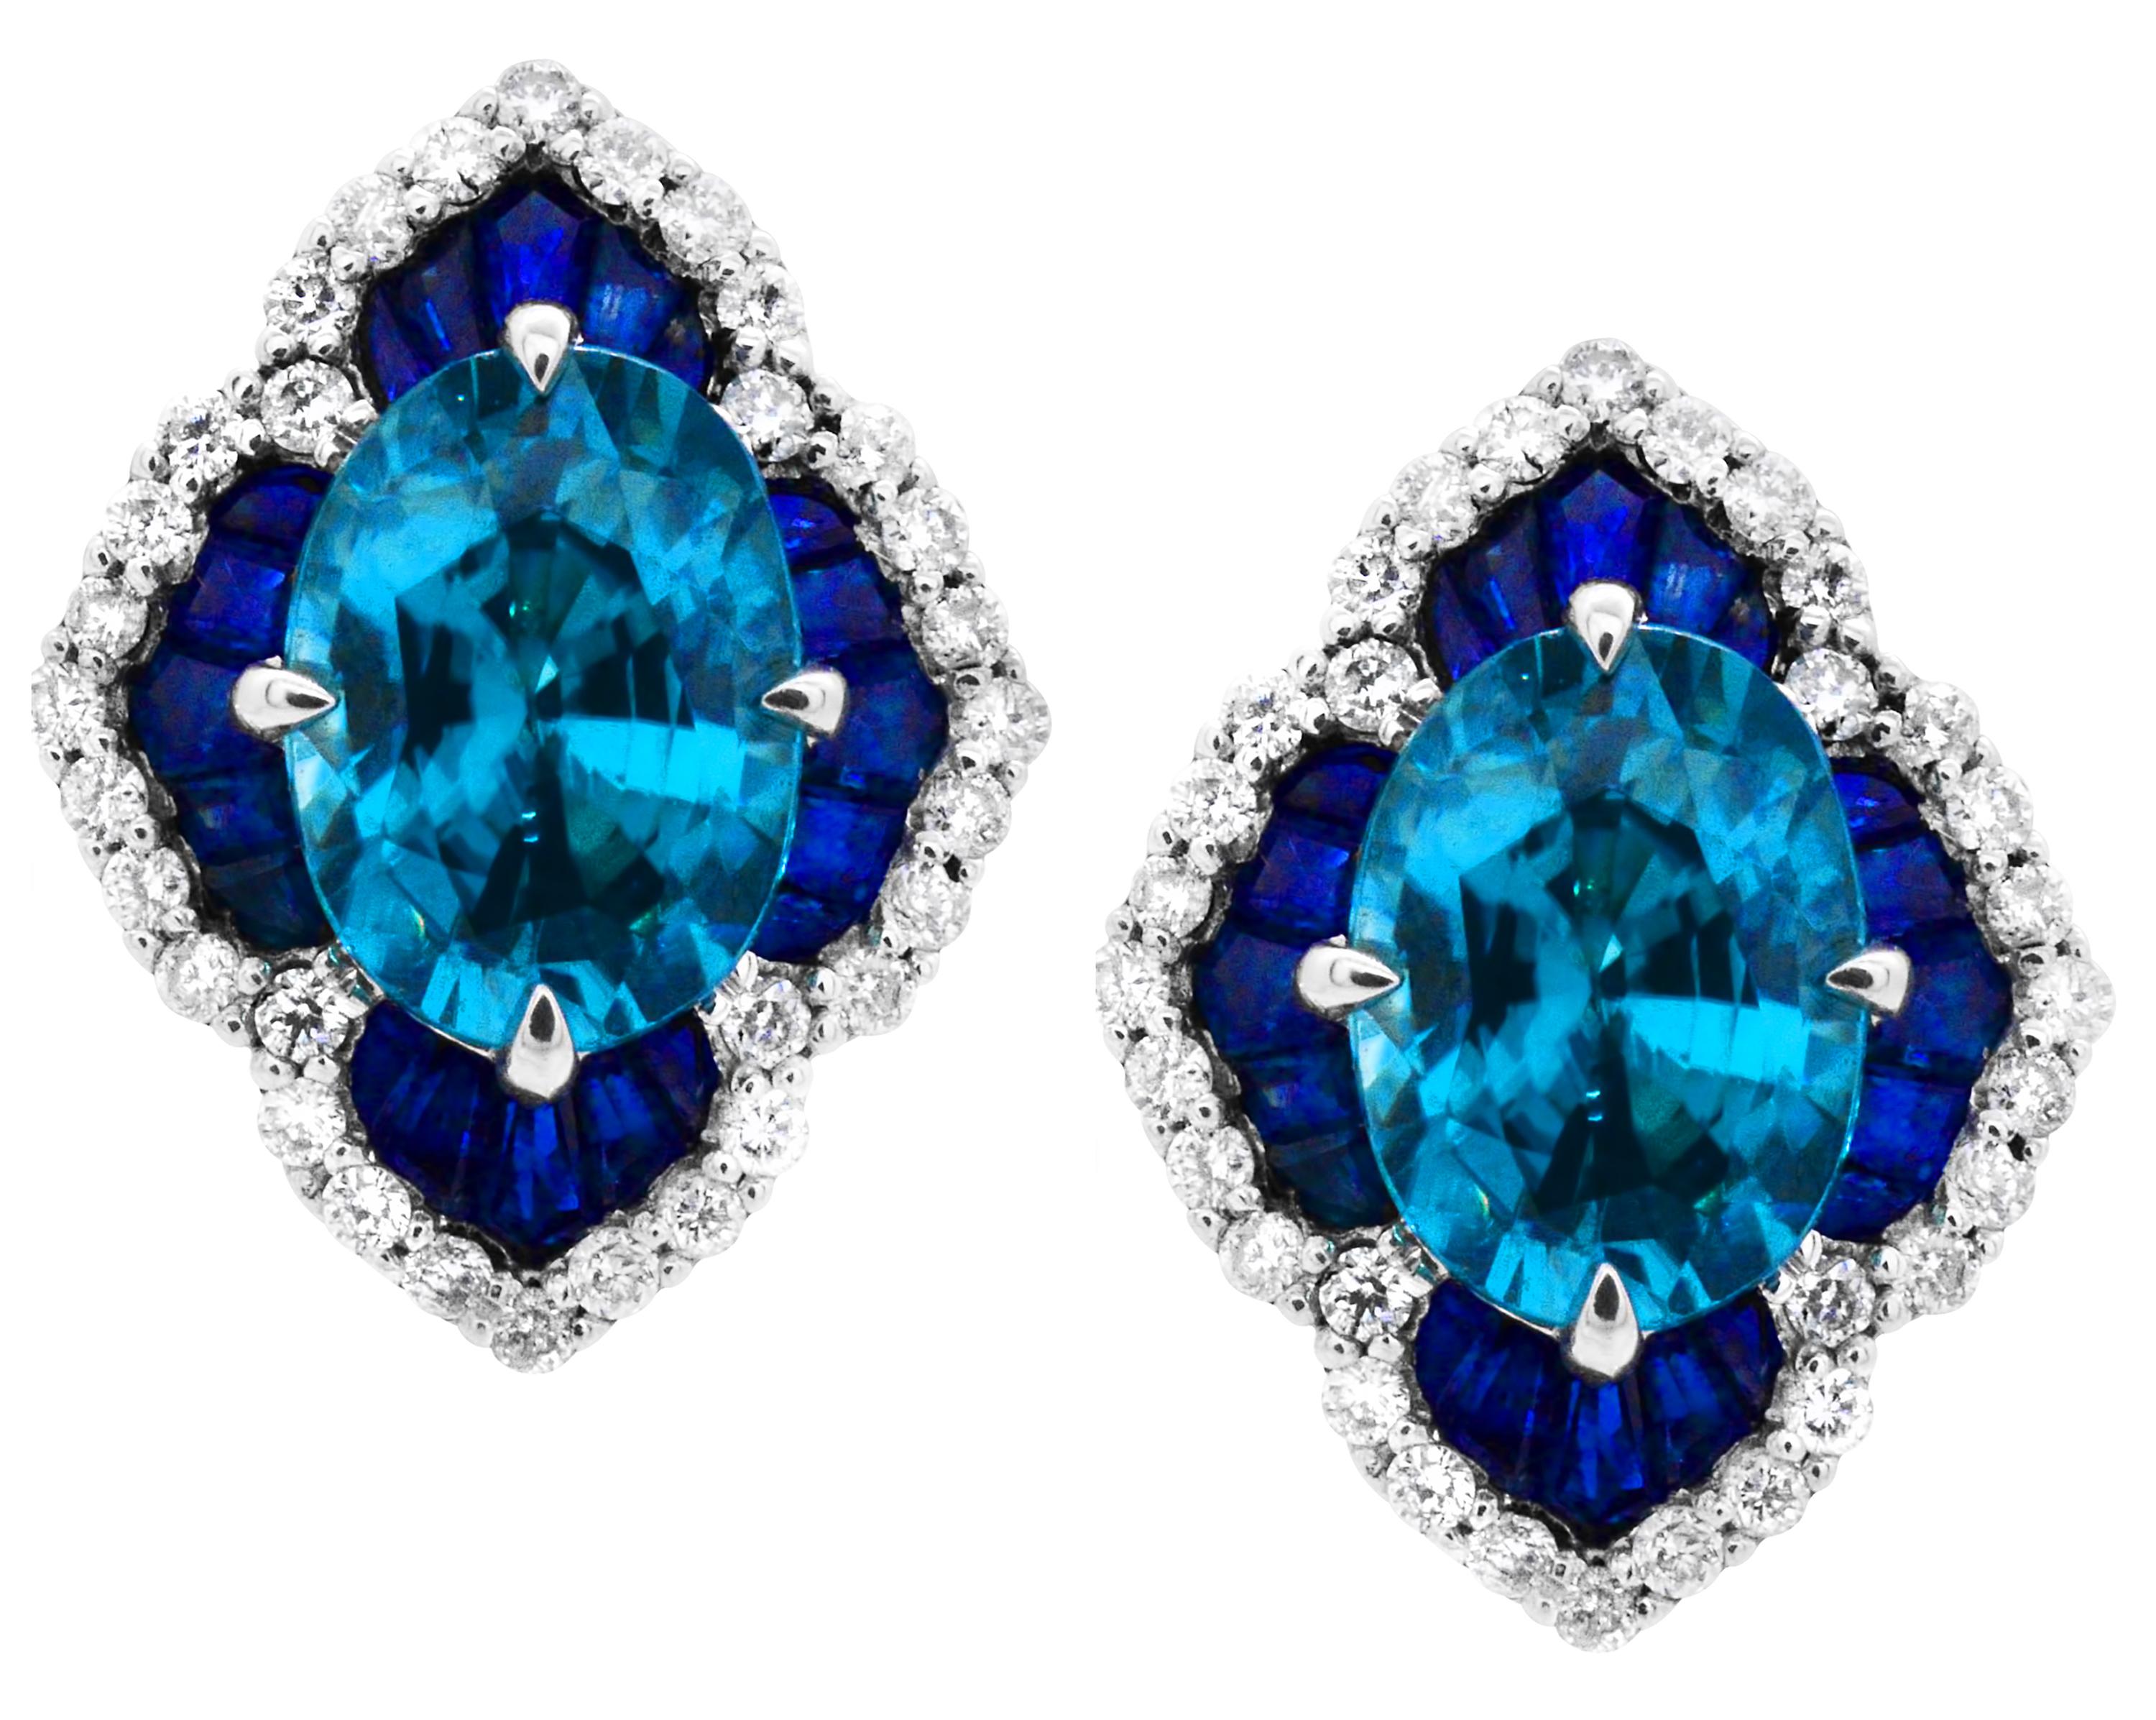 Bright Blue Zircon Scalloped 14Karat White Gold Stud Earrings.  The center 7 x 5 mm 1.40 carat oval Blue Zircon on these earrings will delight you with their cool crisp color.  The 3.20 carats of accompanying handset tapered baguette sapphires will